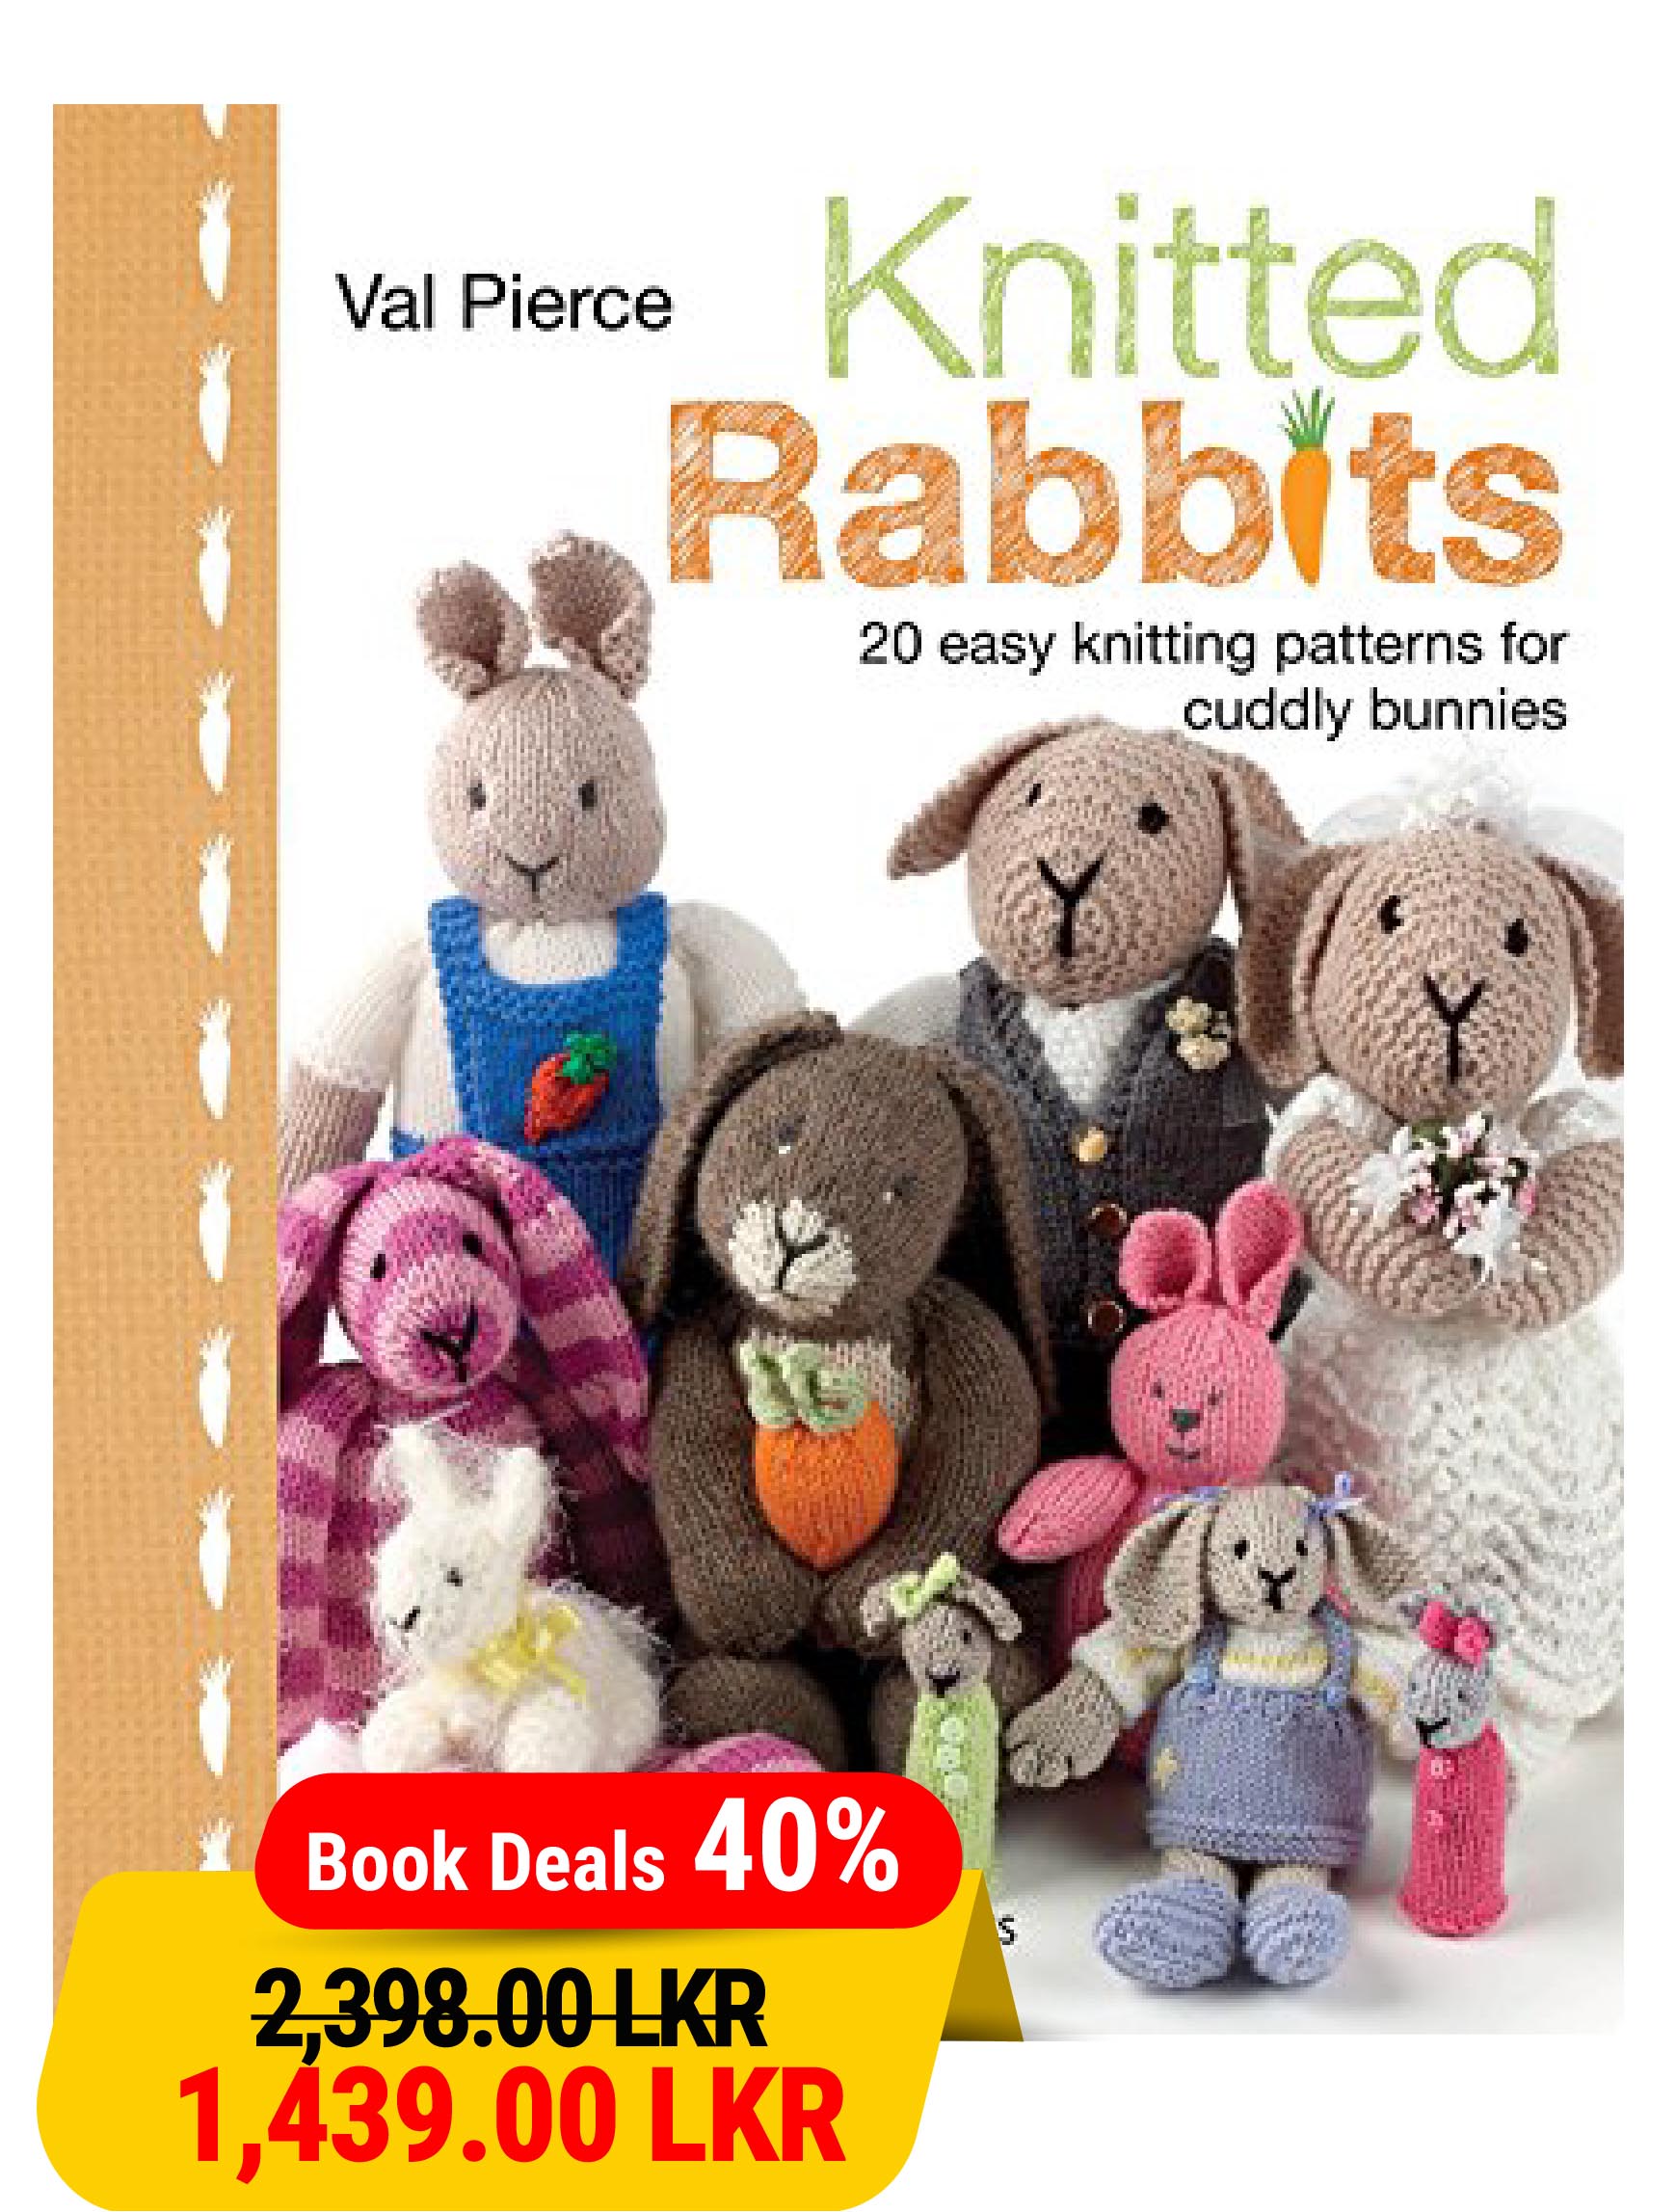 Knitted Rabbits 20 easy knitting patterns for cuddly bunnies